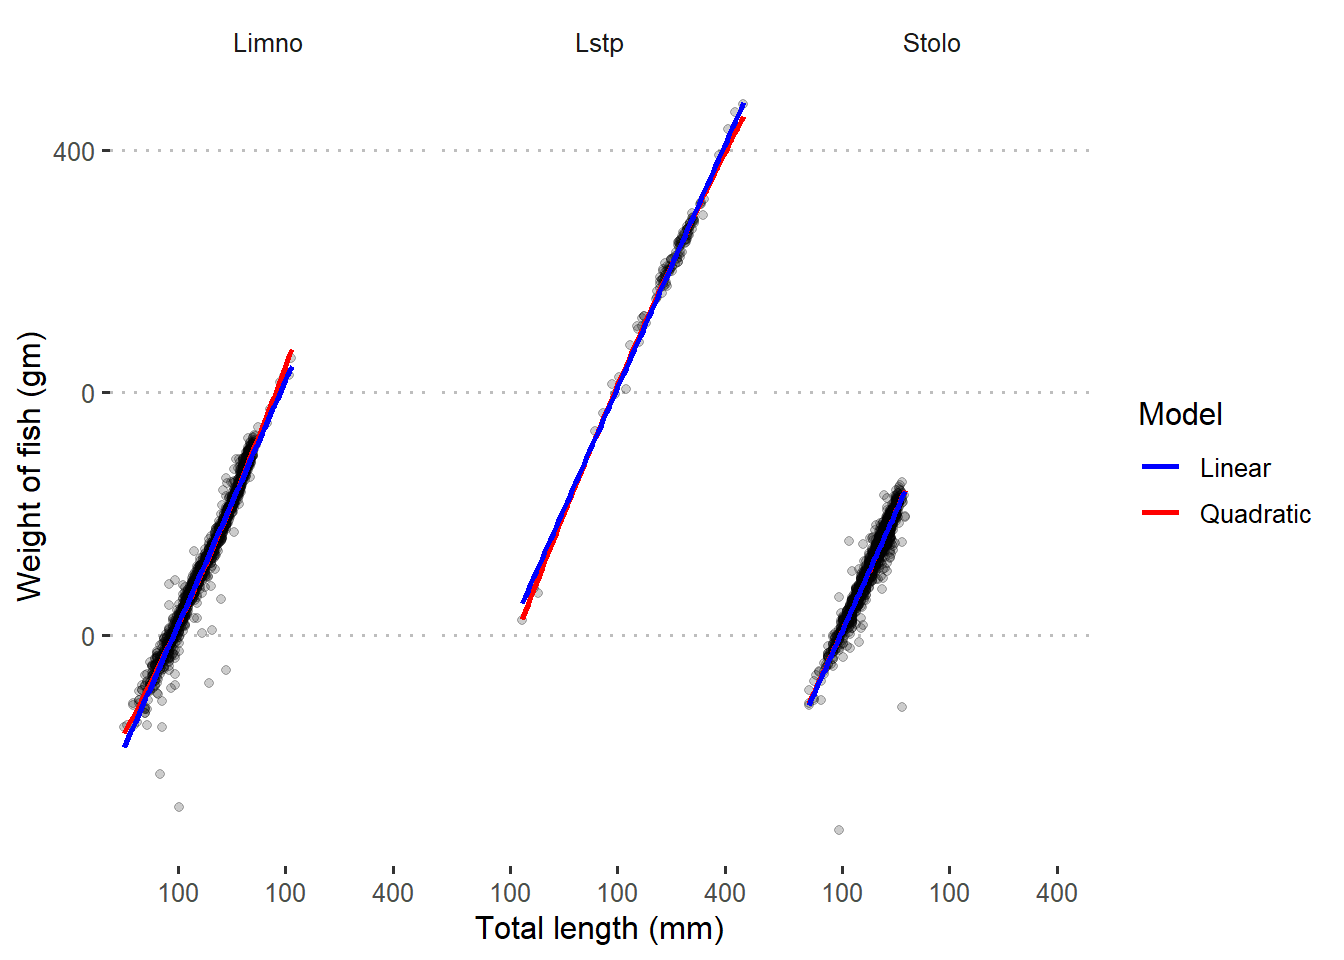 Quadratic and linear regression line superimposed in scatterplot with log-transformed data